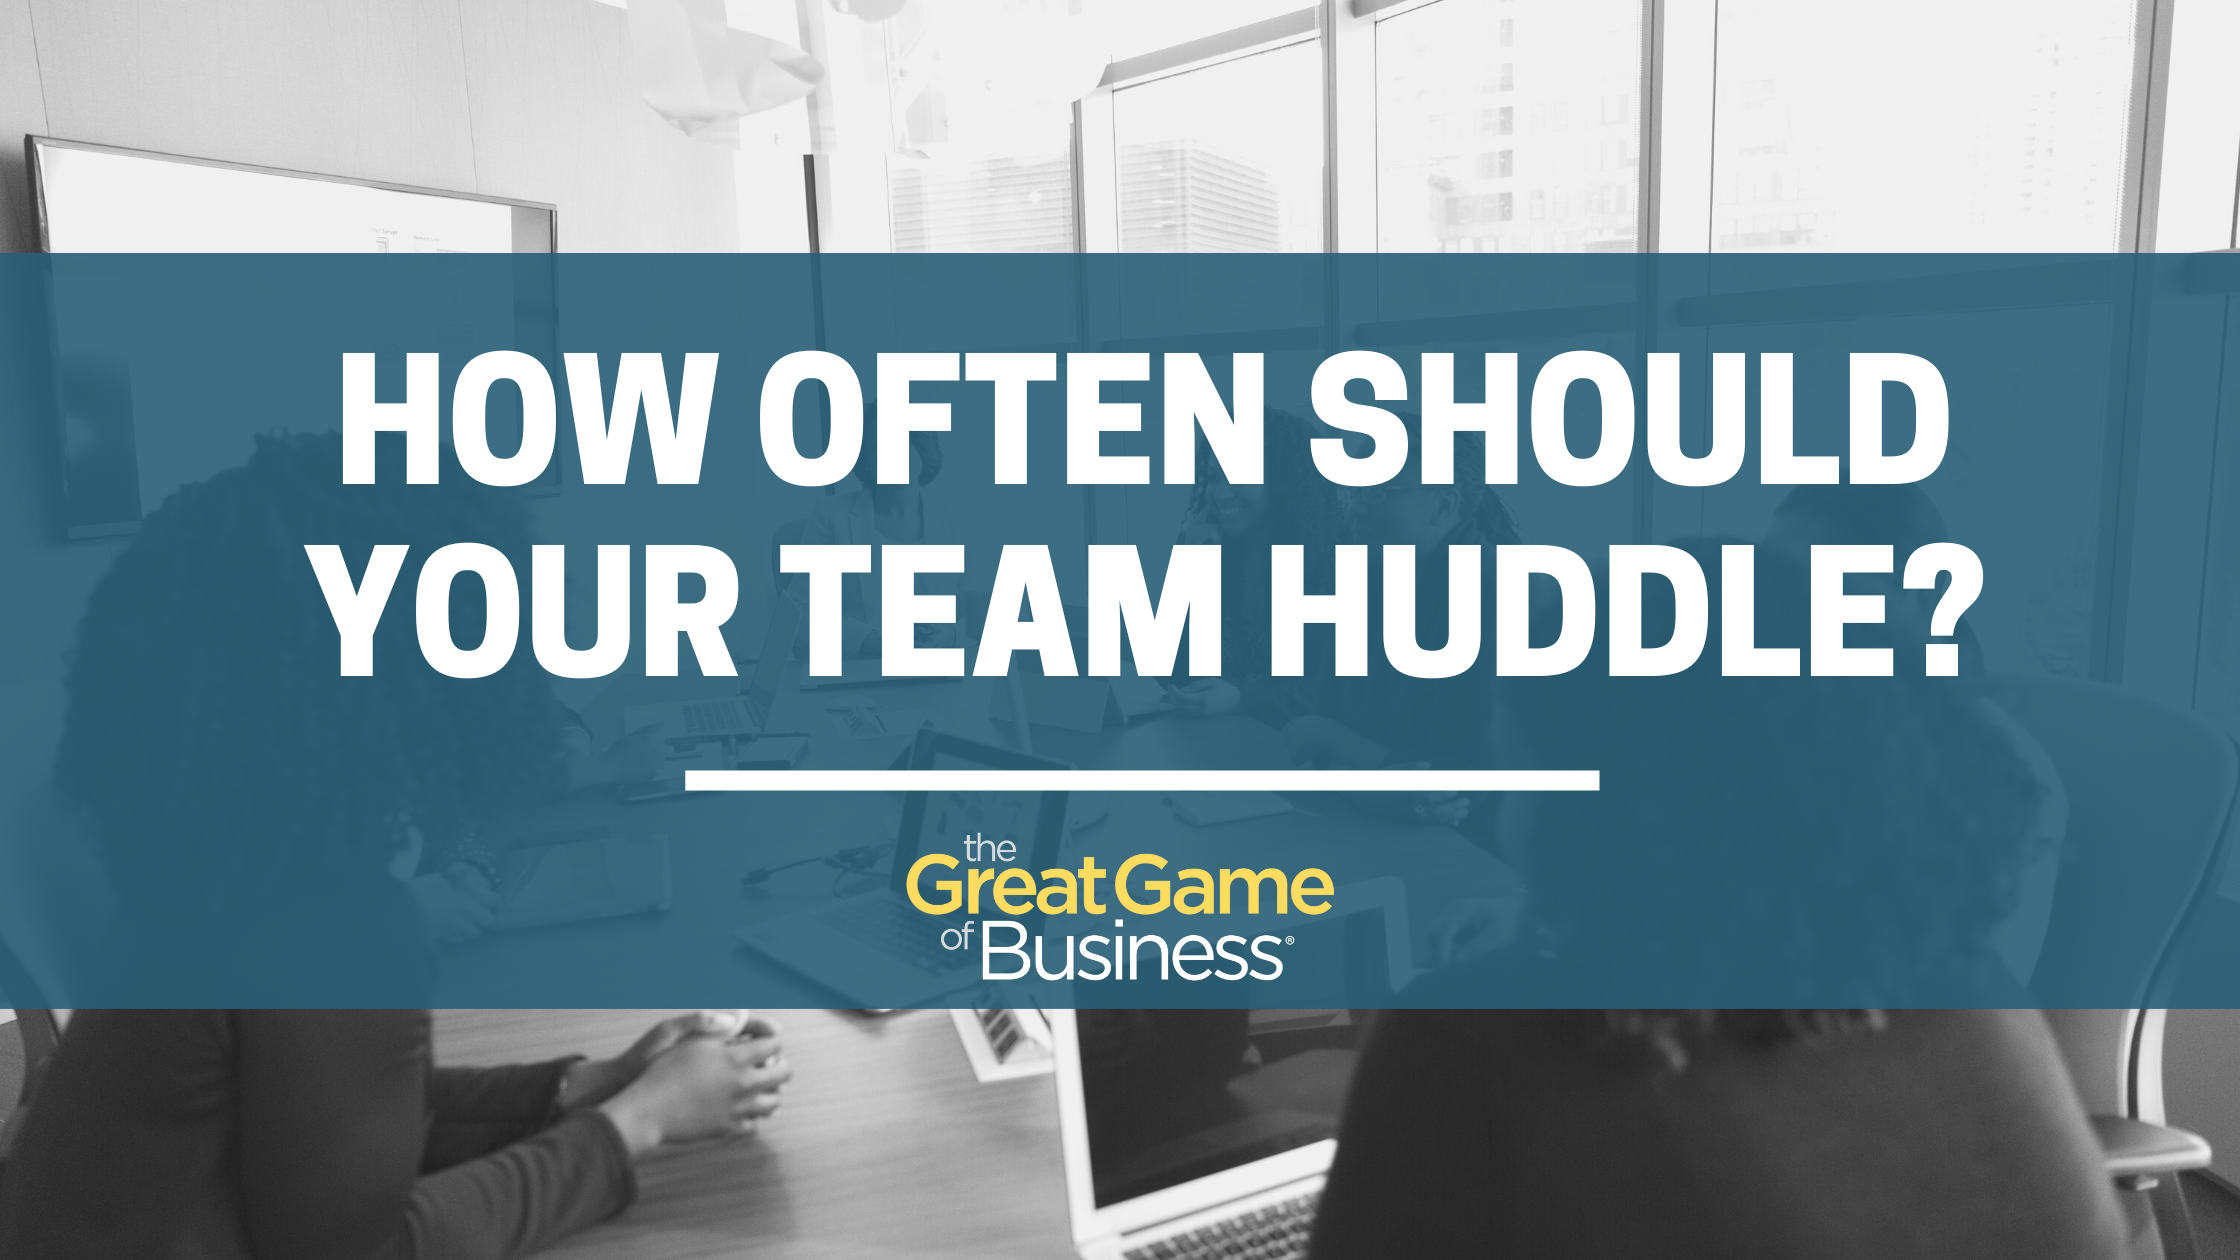 How Often Should Your Team Huddle?